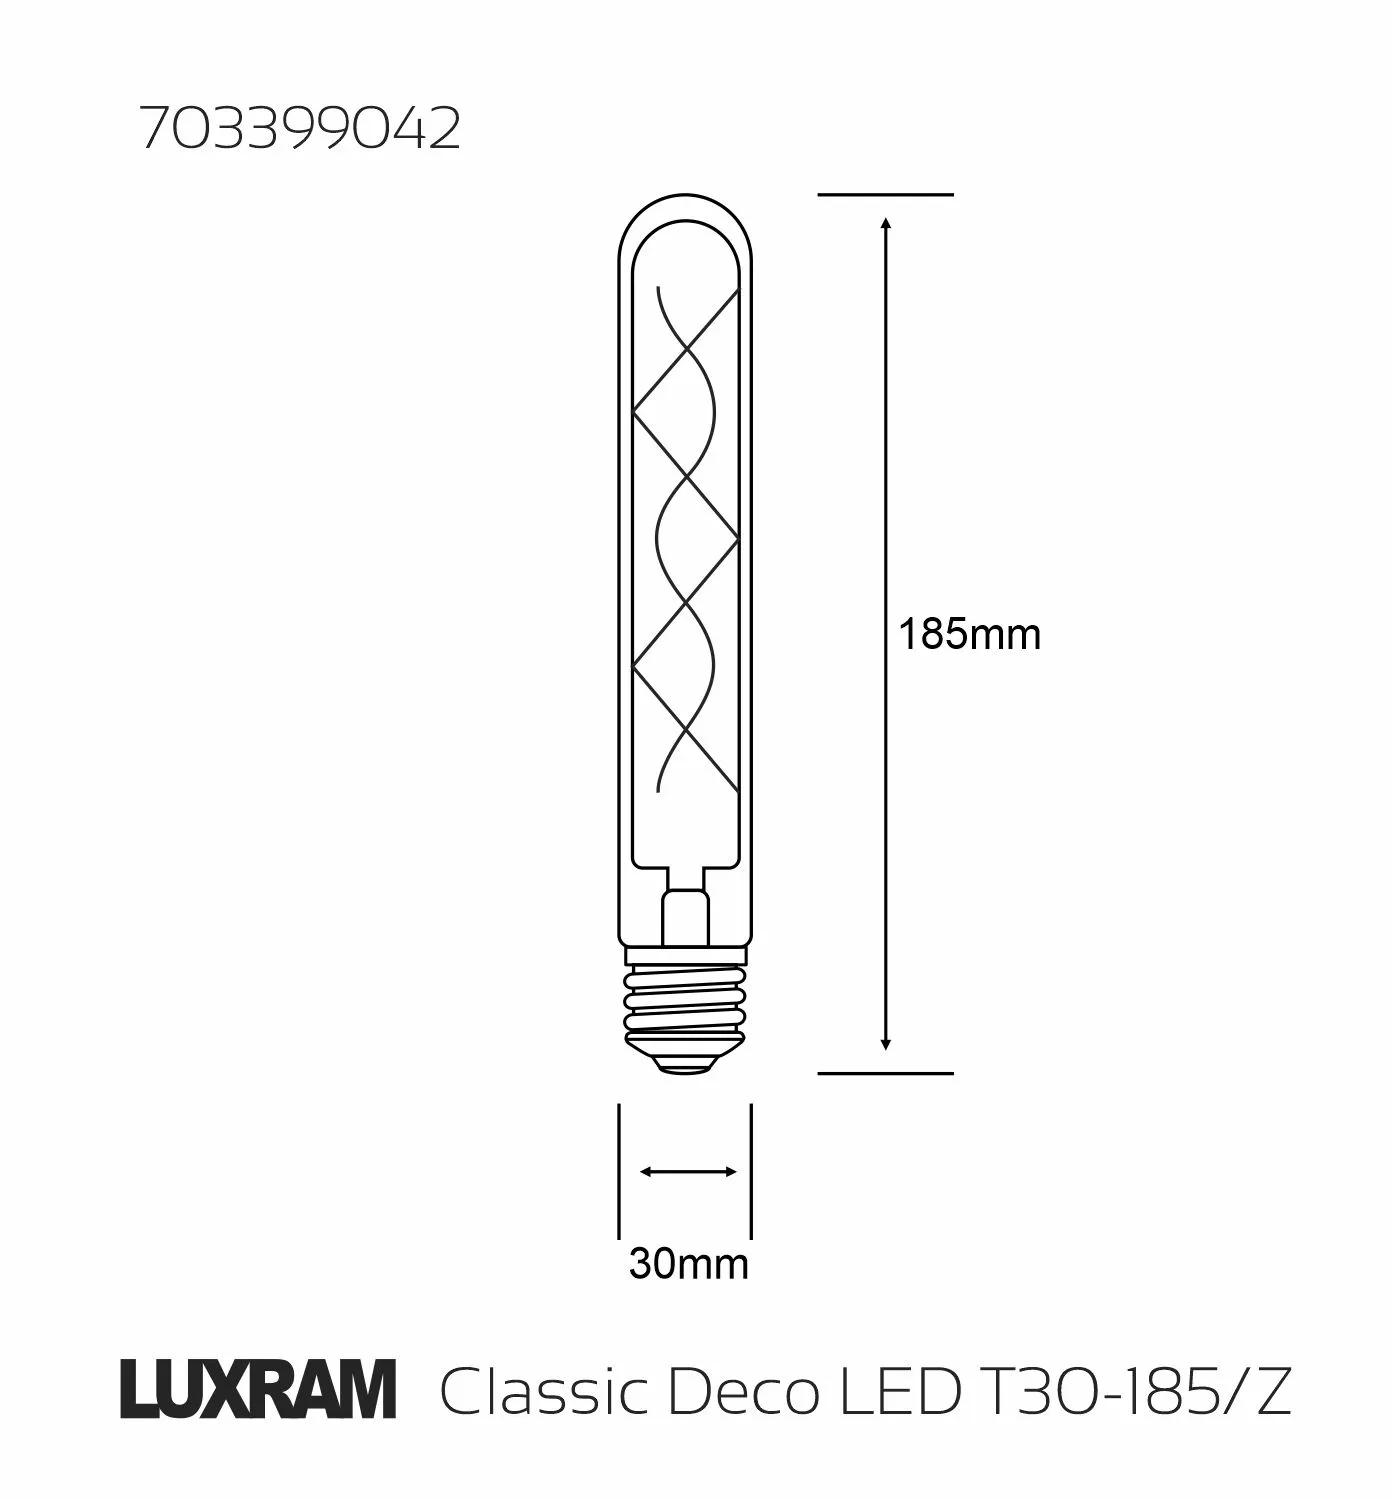 Classic Deco Tubular Z 185mm 4W E27 Dimmable 4000K 300lm 703399042  Luxram Value Vintage